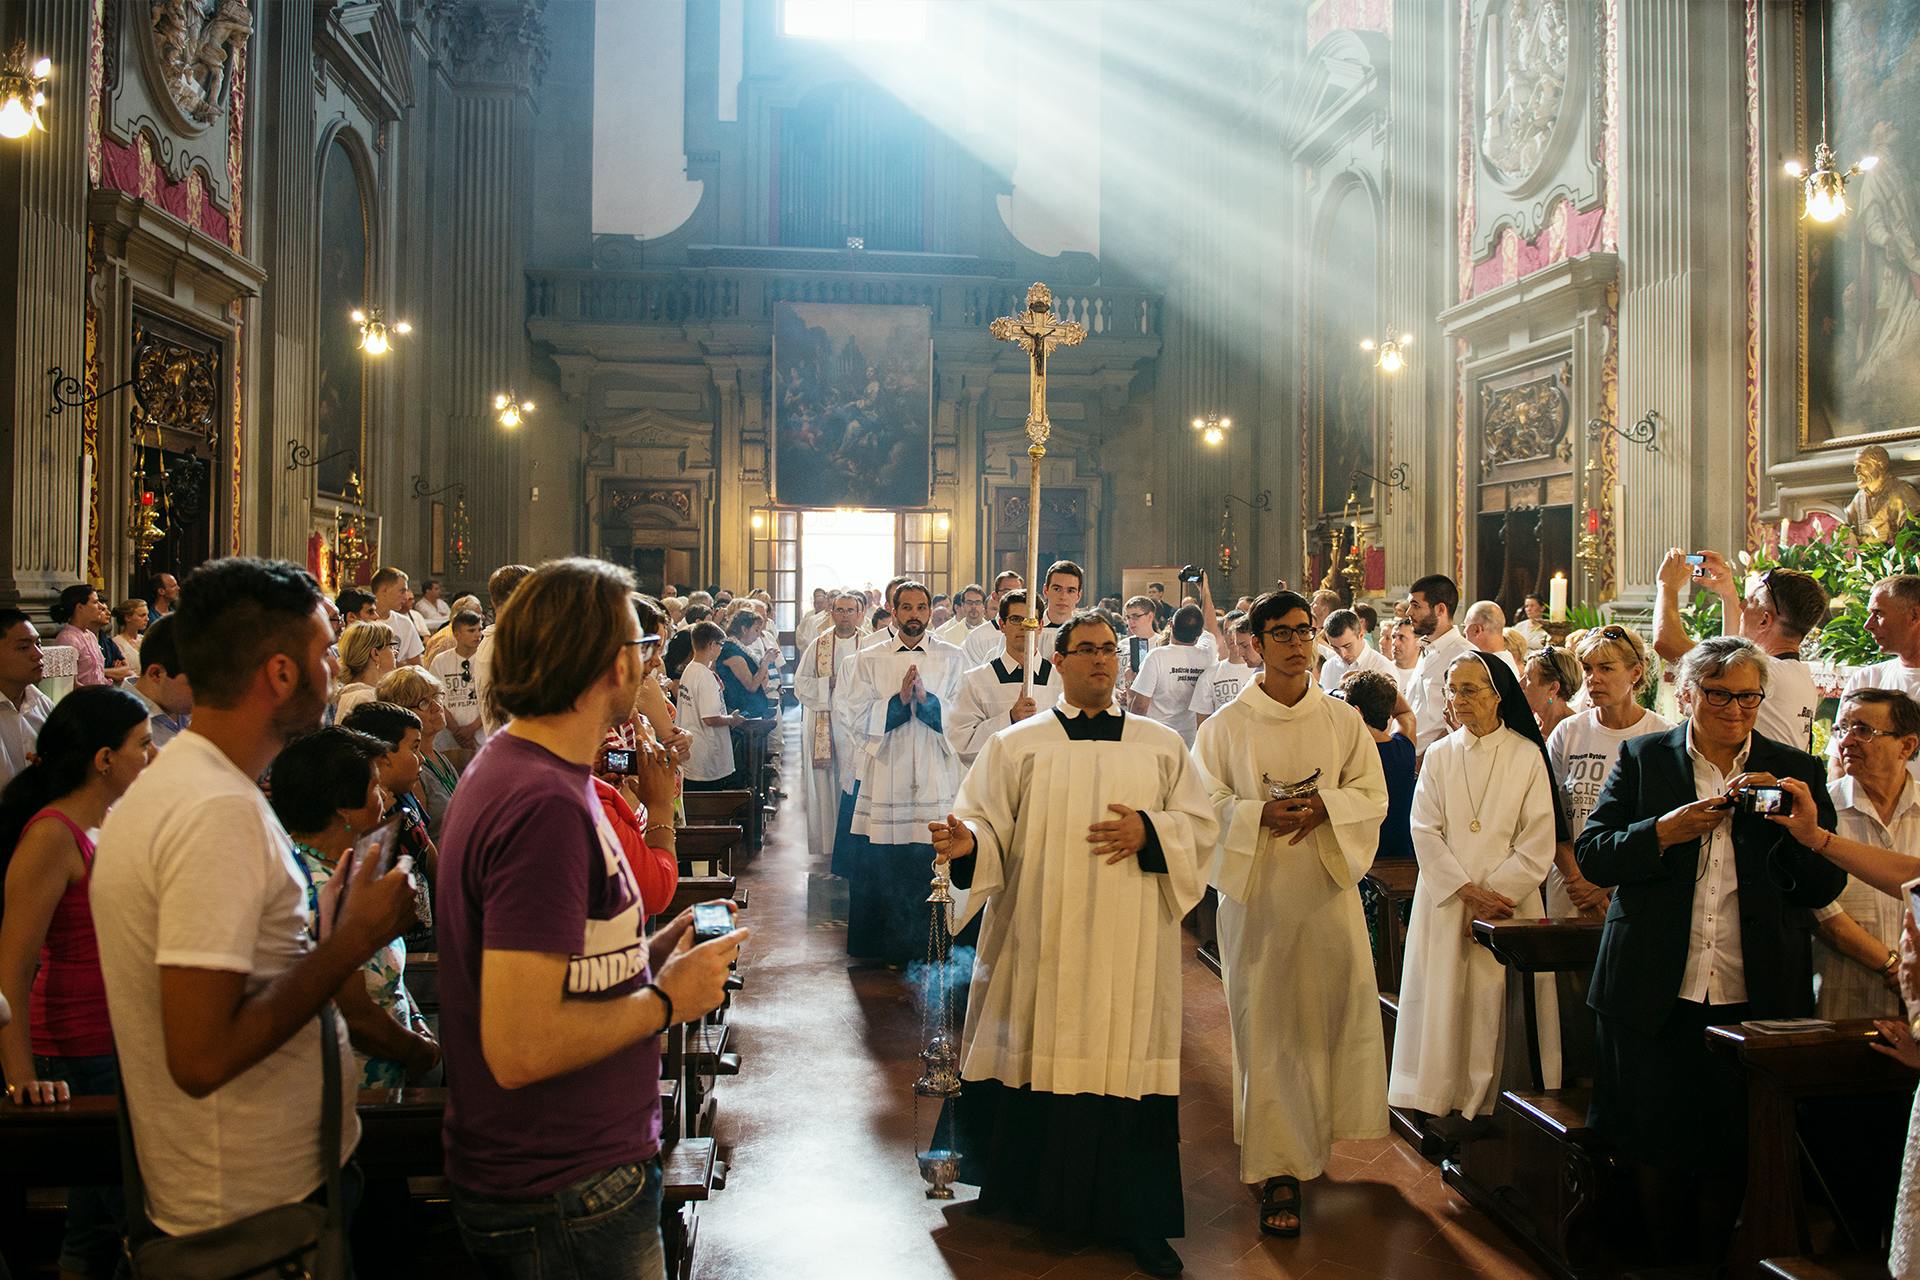 Photo of a Catholic church with people inside